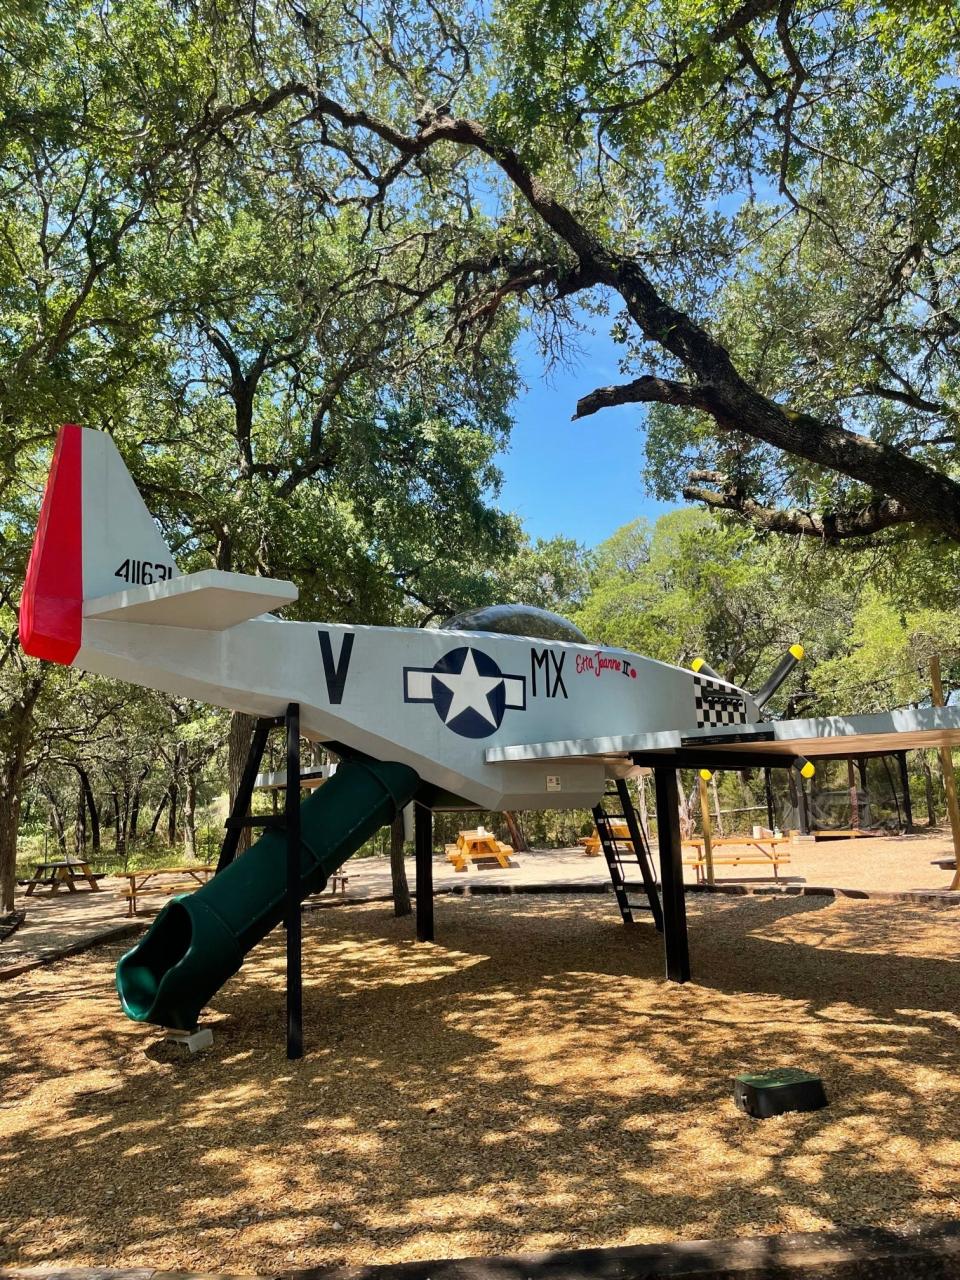 A slide spills out of a replica P-51 Mustang fighter-bomber at the Memorial Miniature Golf and Museum, where the Valentina's Tex Mex BBQ owners operate Cash Cow Burger Co.